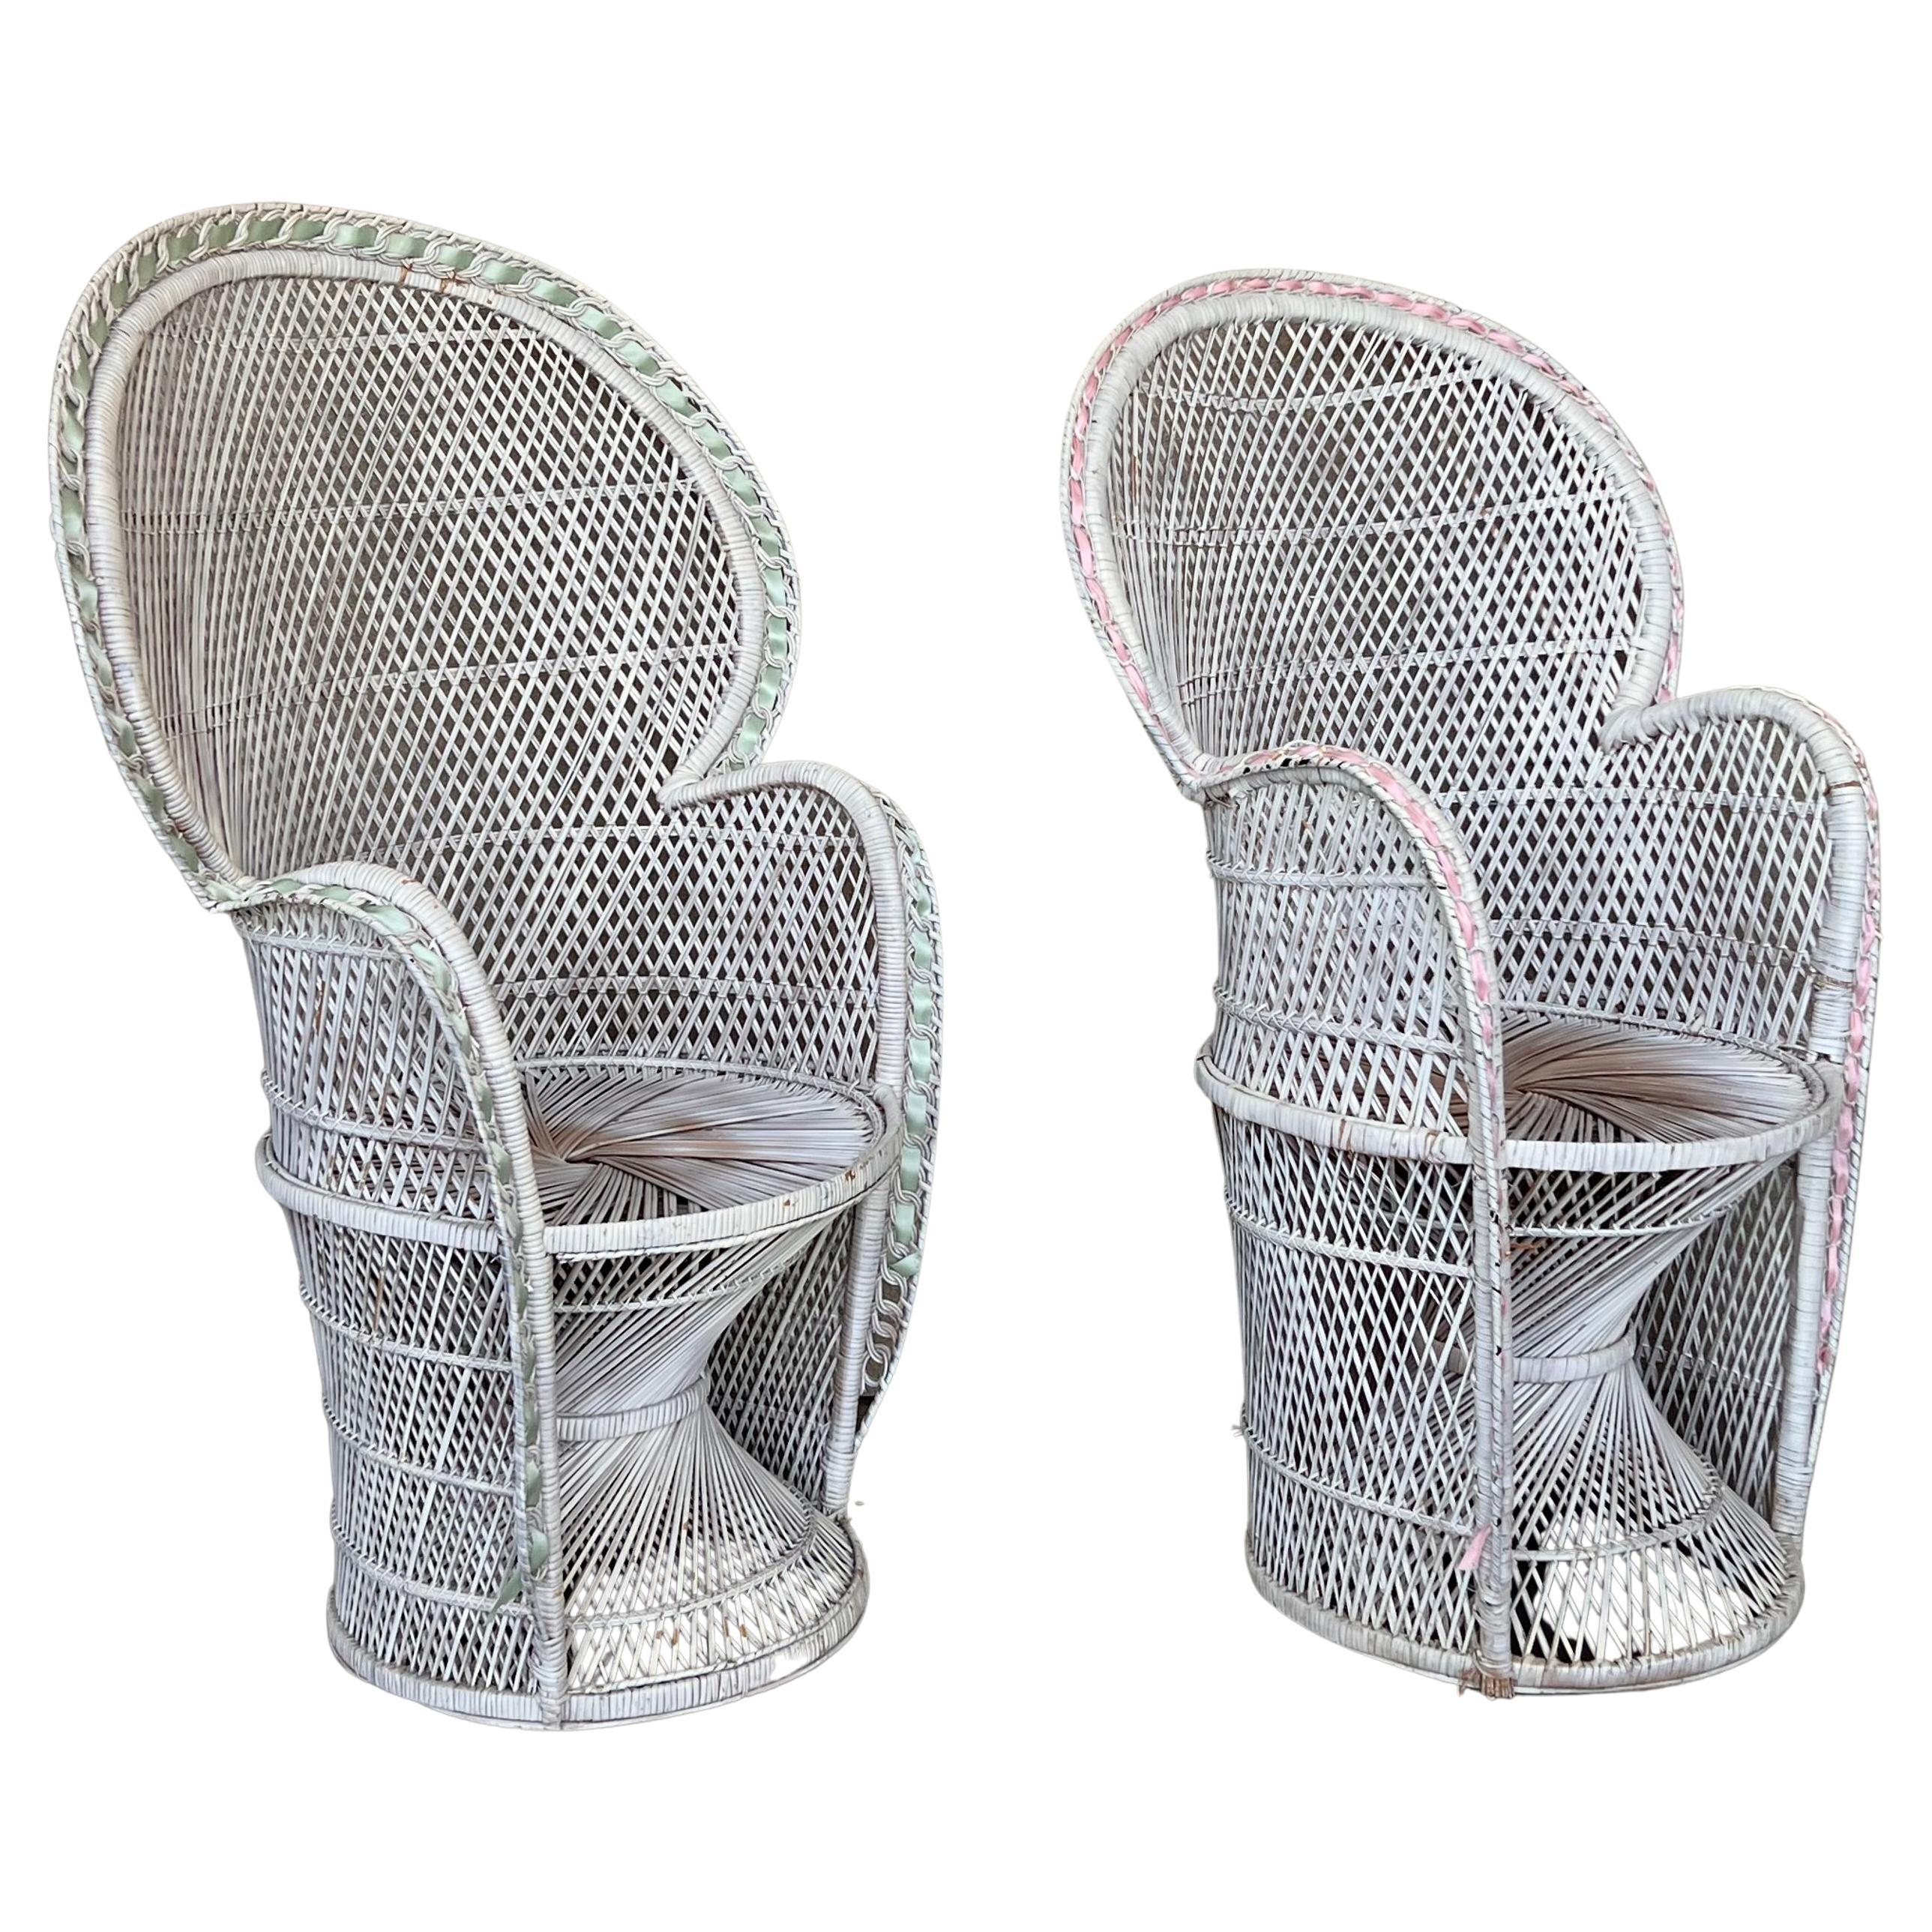 Pair of Vintage White Wicker Peacock Chair in the Emmanuelle Style